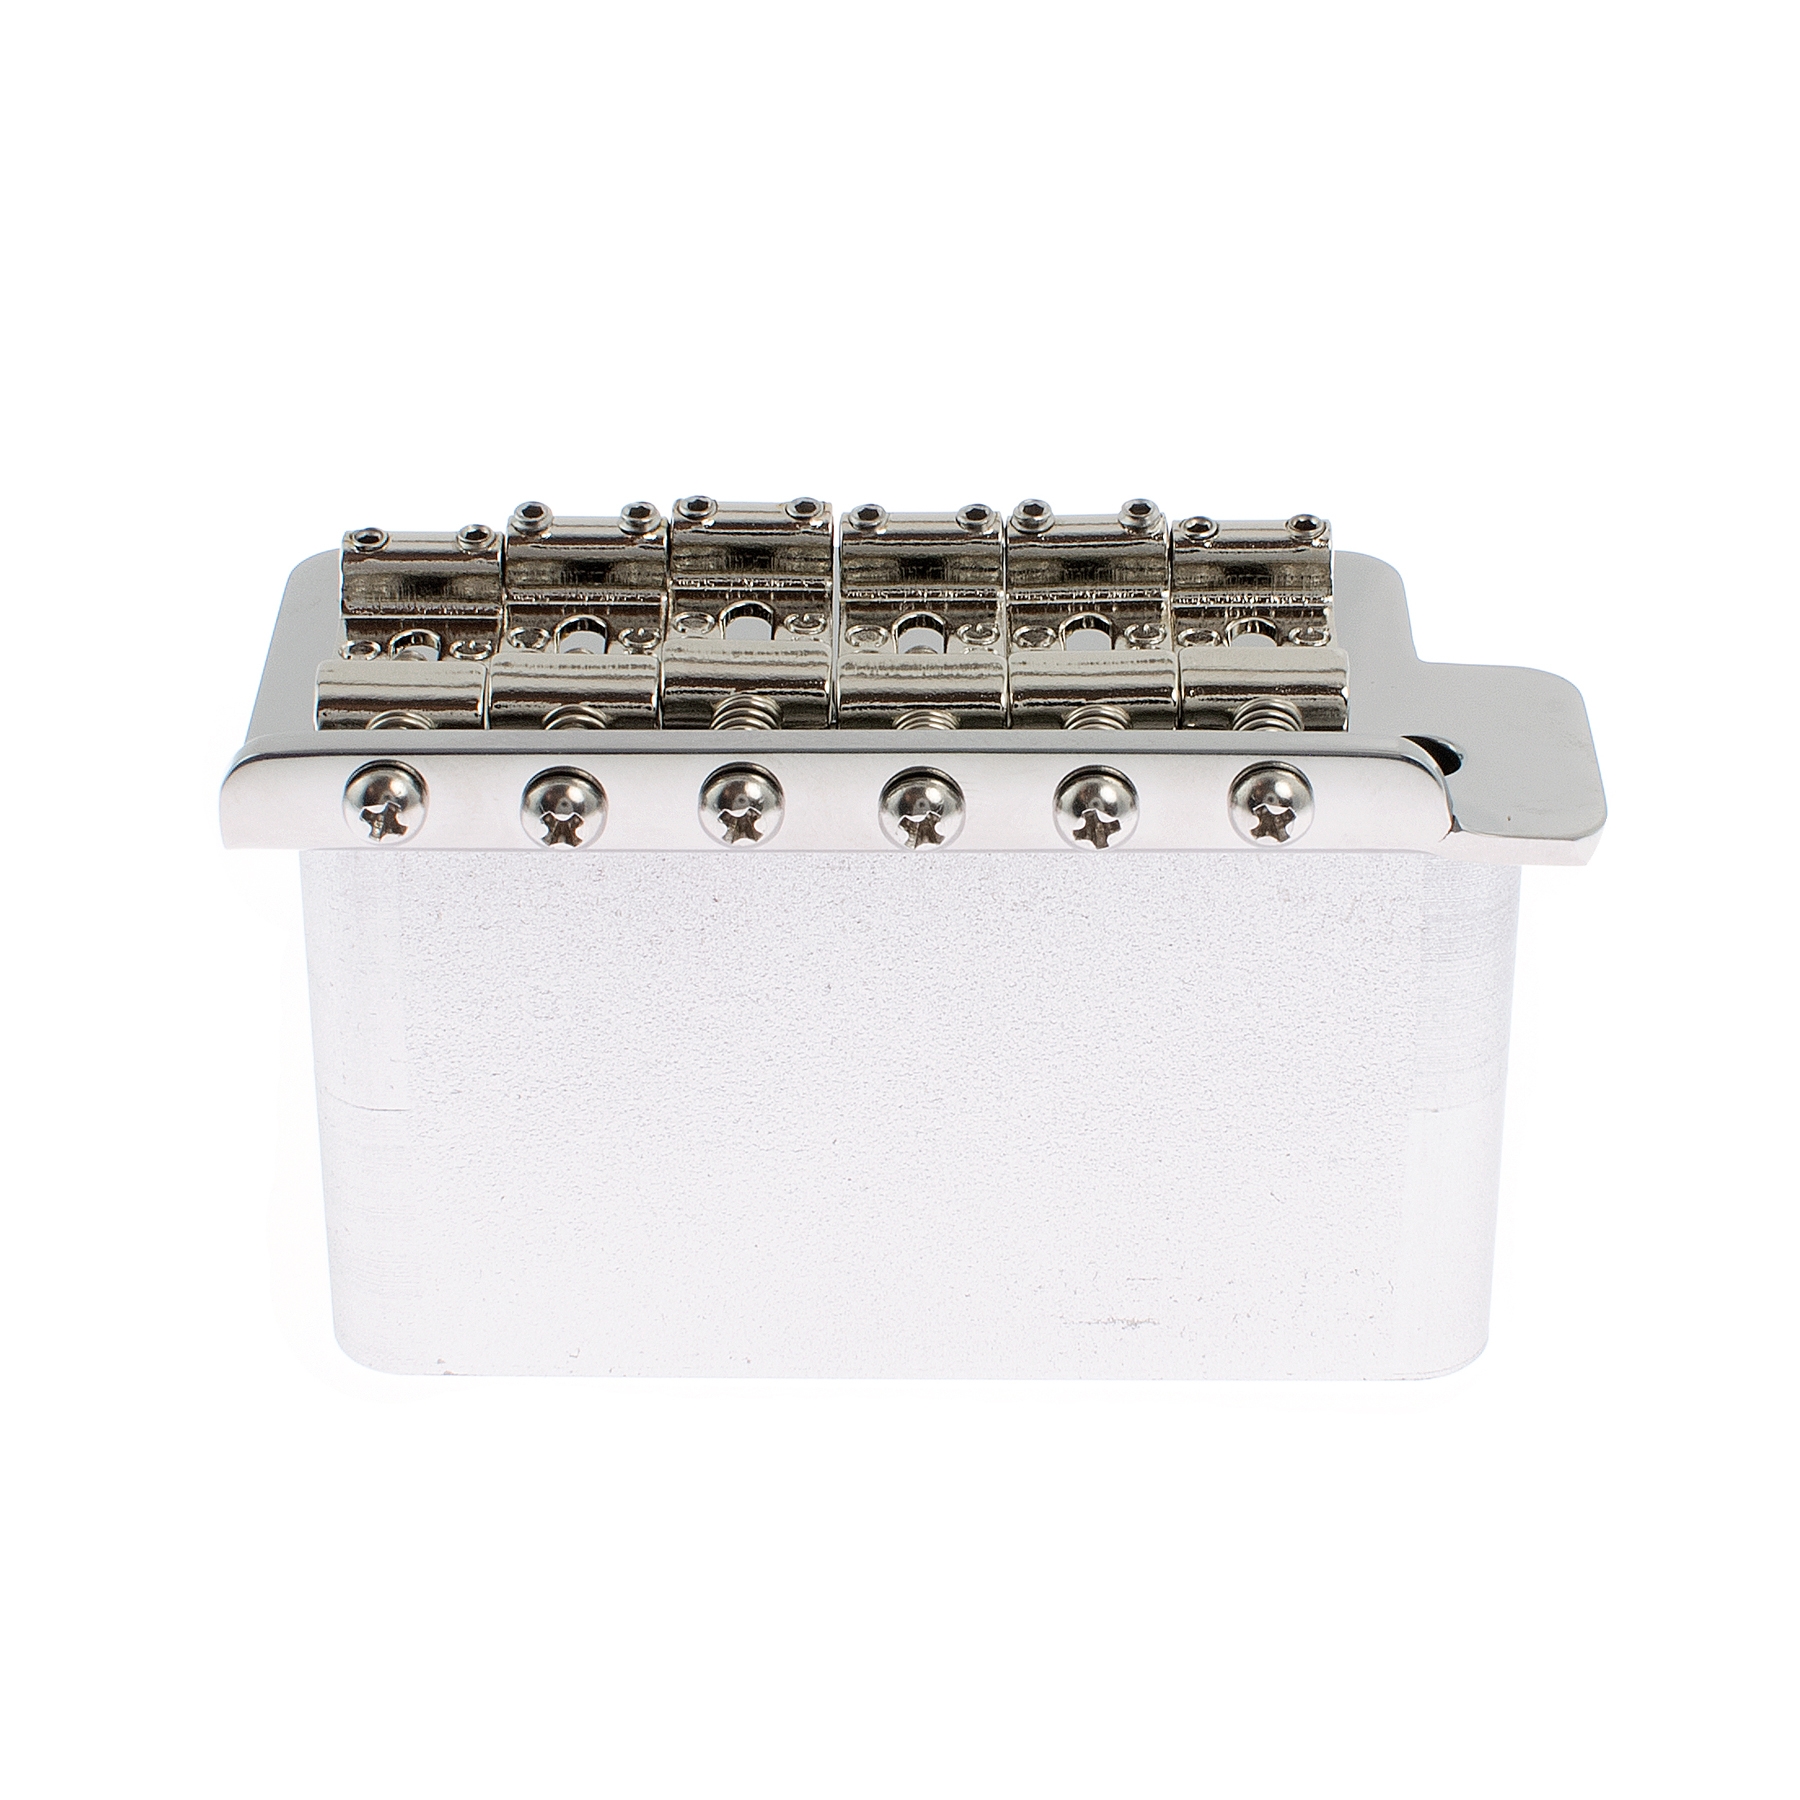 2-1/16 String Spacing Read Description For Fit List w/Pop-In Gilmour-Length Arm Complete Unit as Pictured. Callaham Stratocaster Tremolo Bridge 2-7/32 Screw Spacing Vintage Narrow 